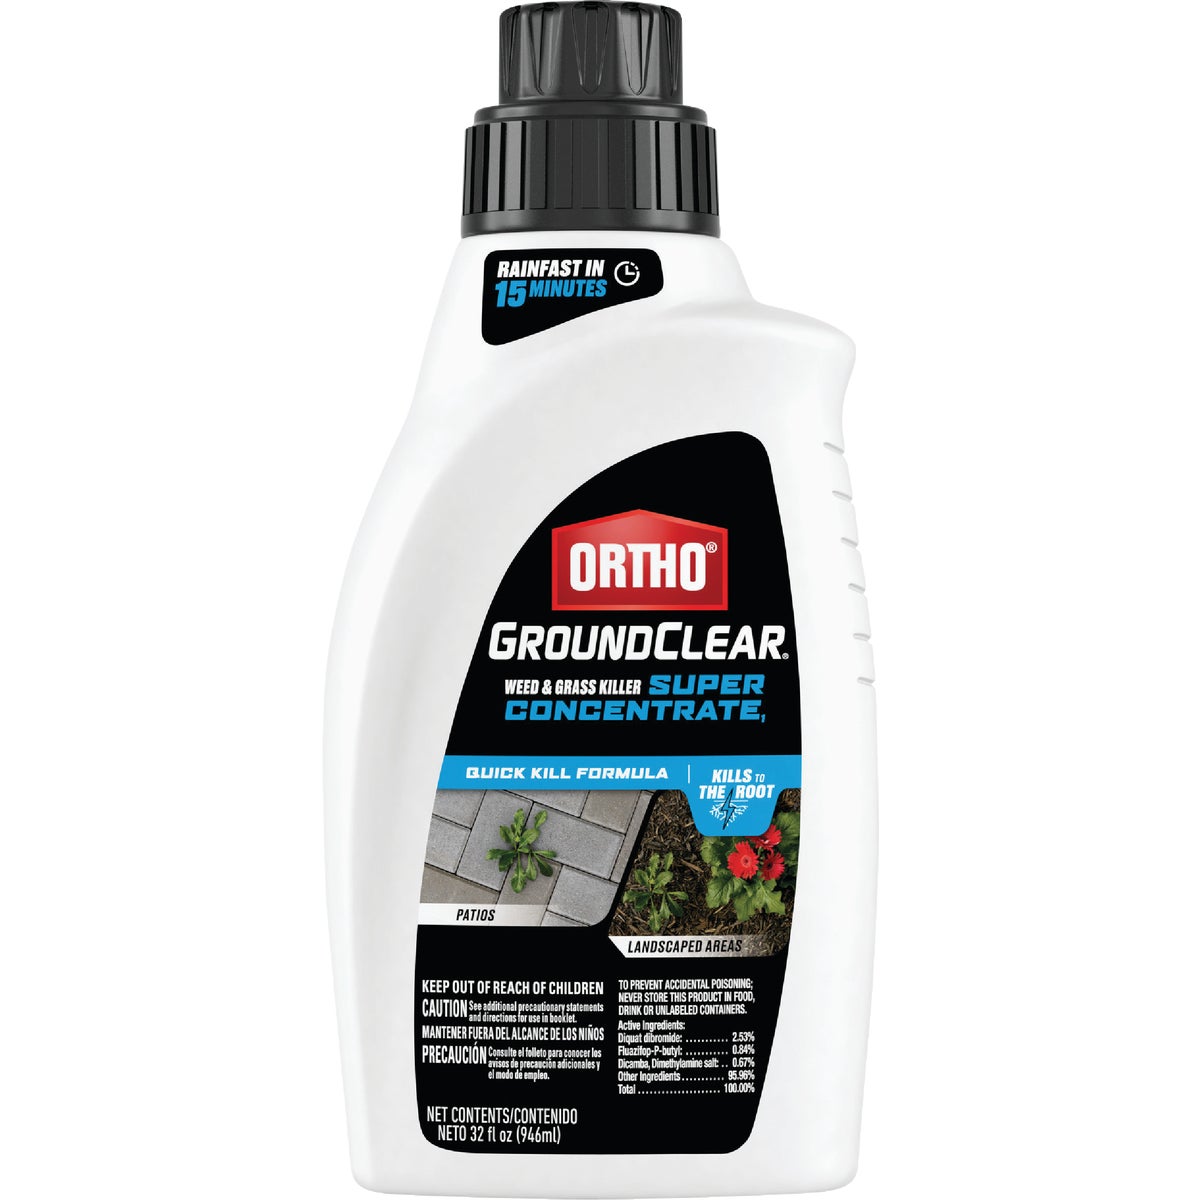 Ortho GroundClear 32 Oz. Super Concentrate Weed Killer